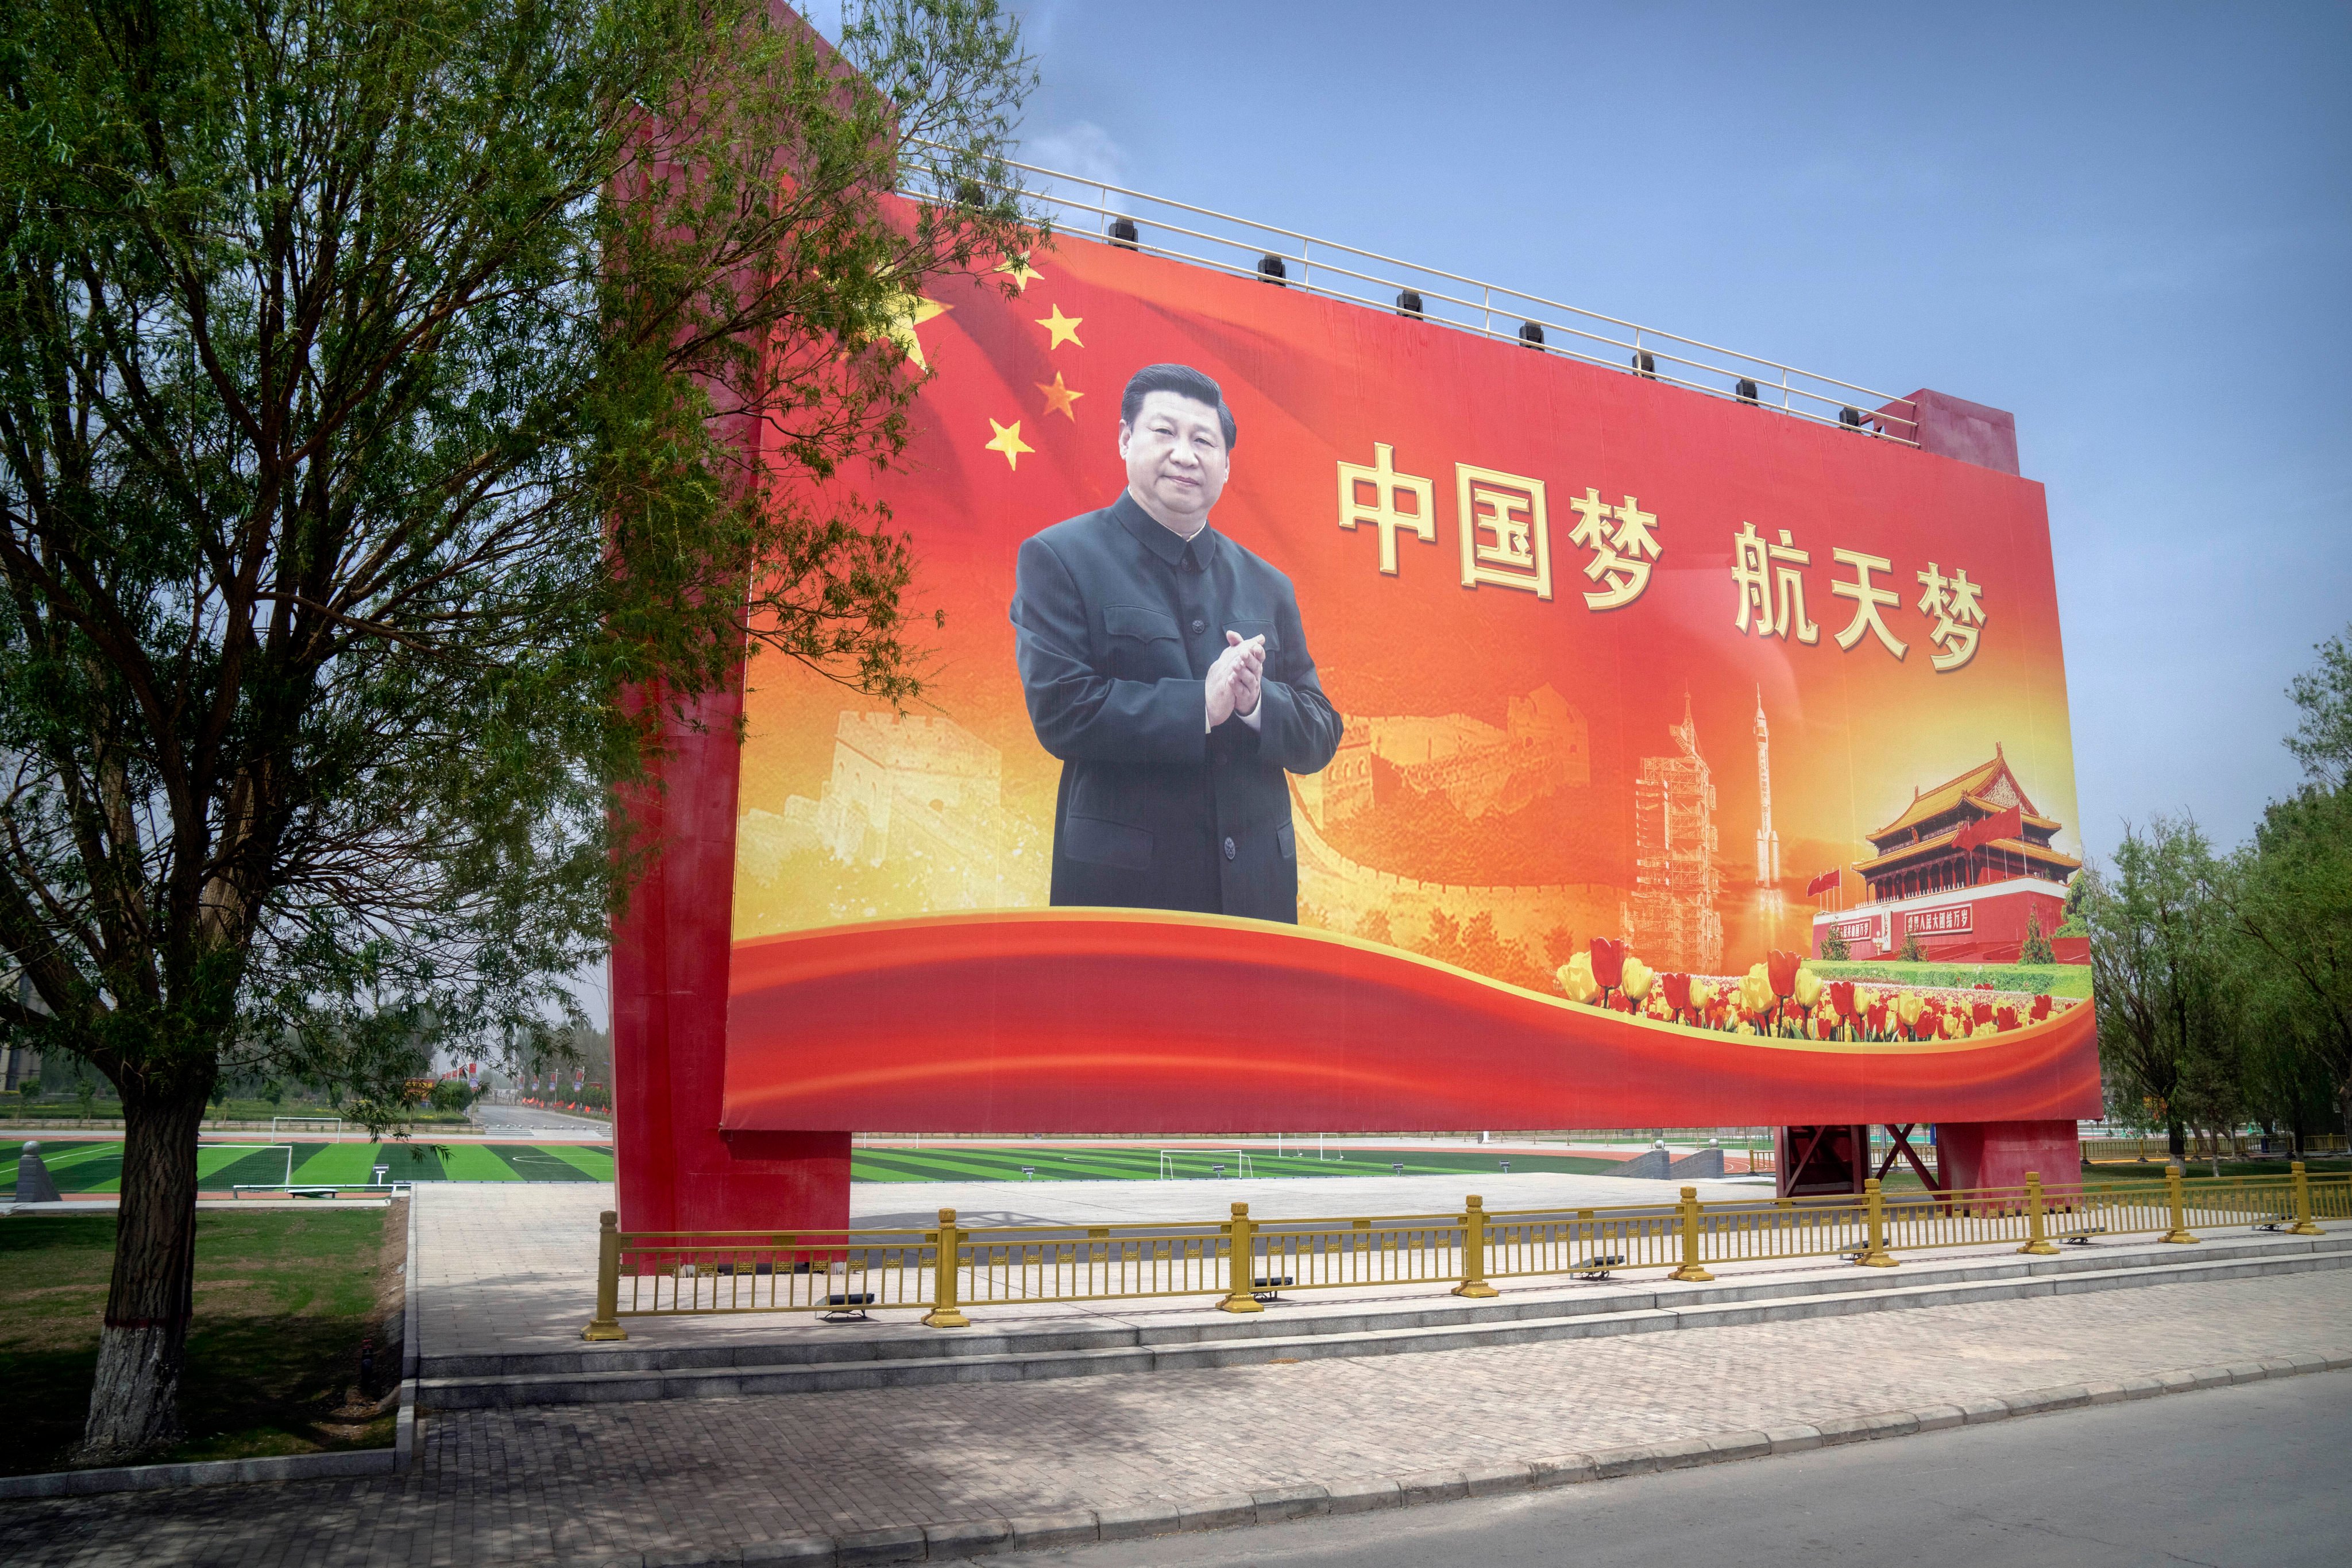 Chinese President Xi Jinping has directed the Politburo to speed up progress in China’s education sector to help the country meet its goal of tech self-reliance and drive for innovation. Photo: AP Photo